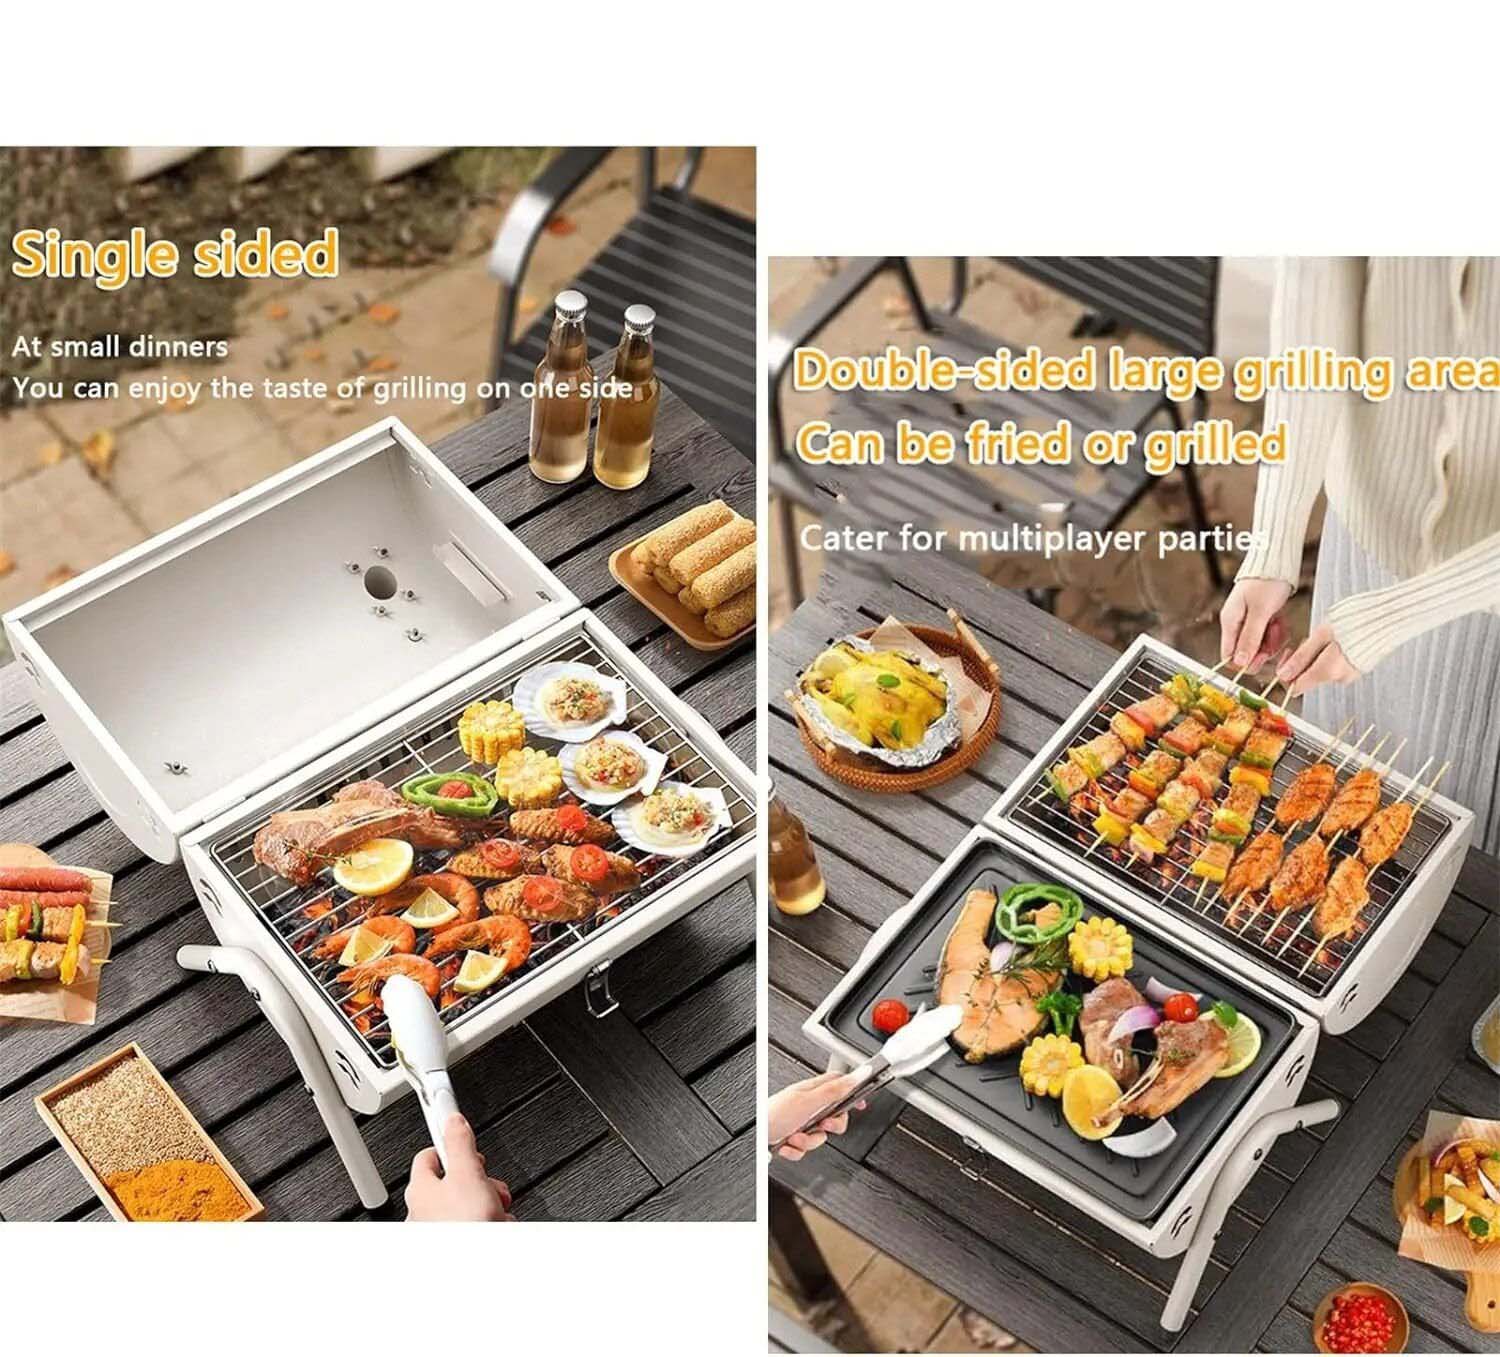 Portable charcoal grill for picnics